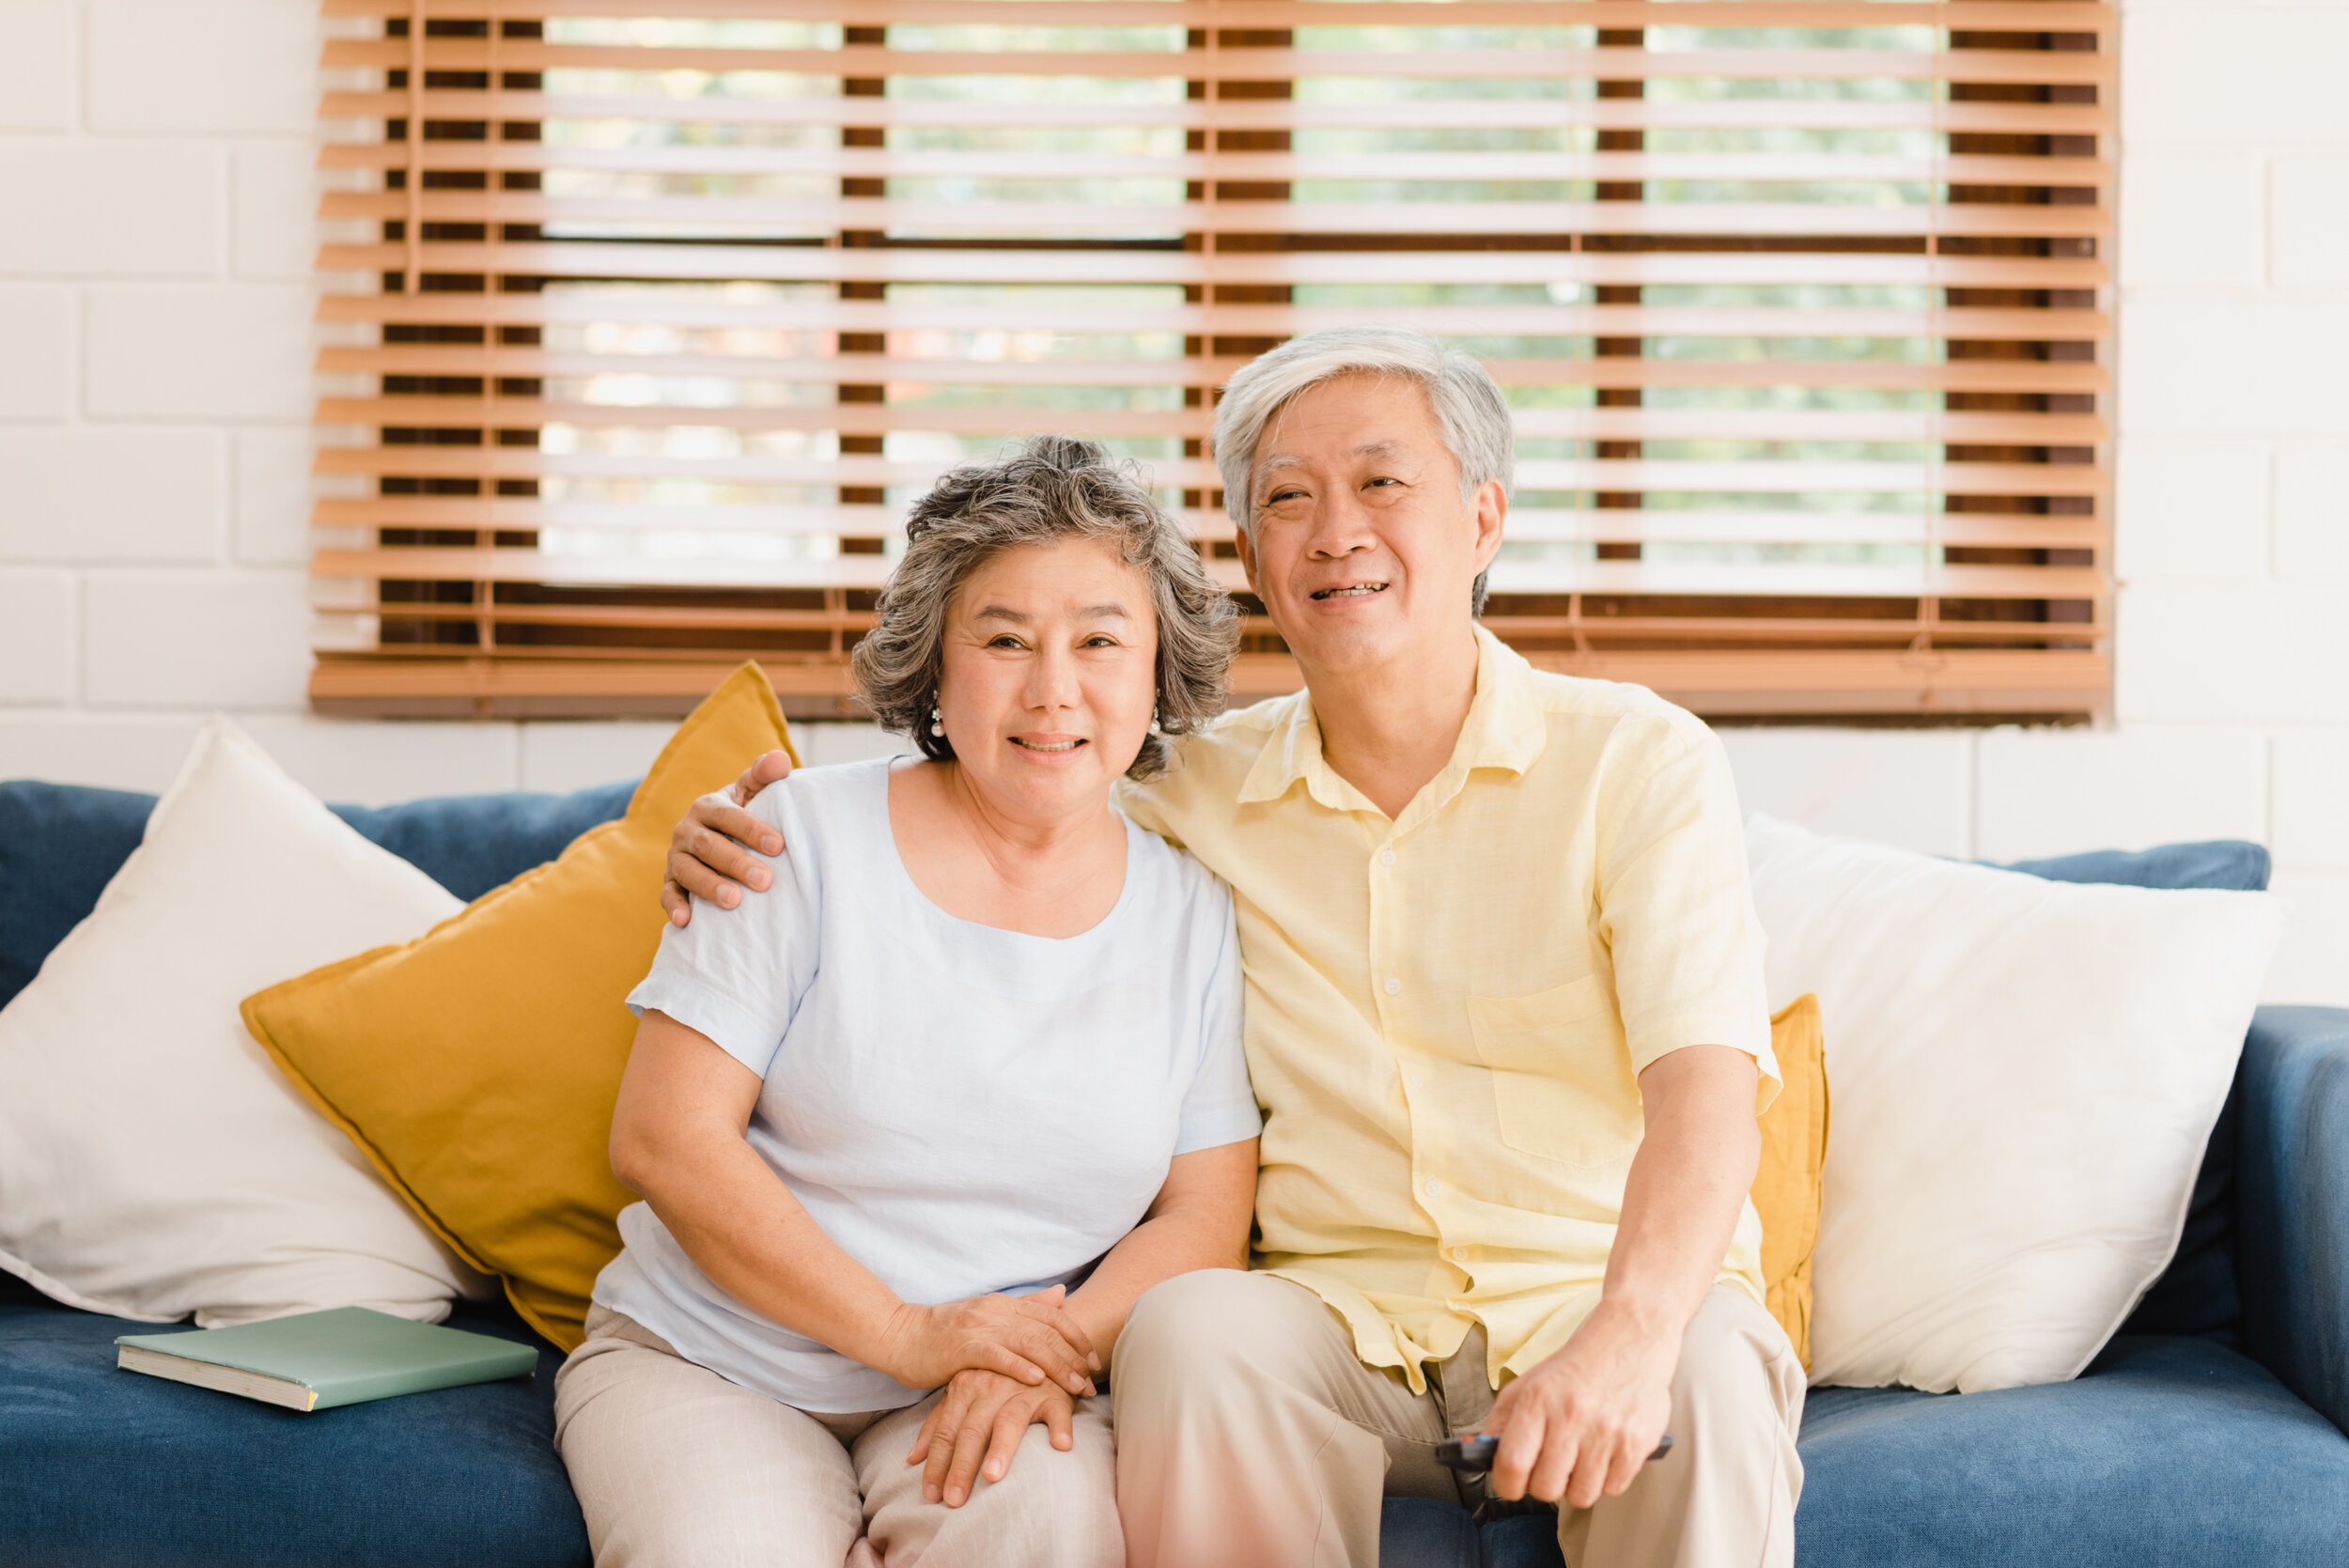 asian-elderly-couple-watching-television-living-room-home-sweet-couple-enjoy-love-moment-while-lying-sofa-when-relaxed-home.jpg